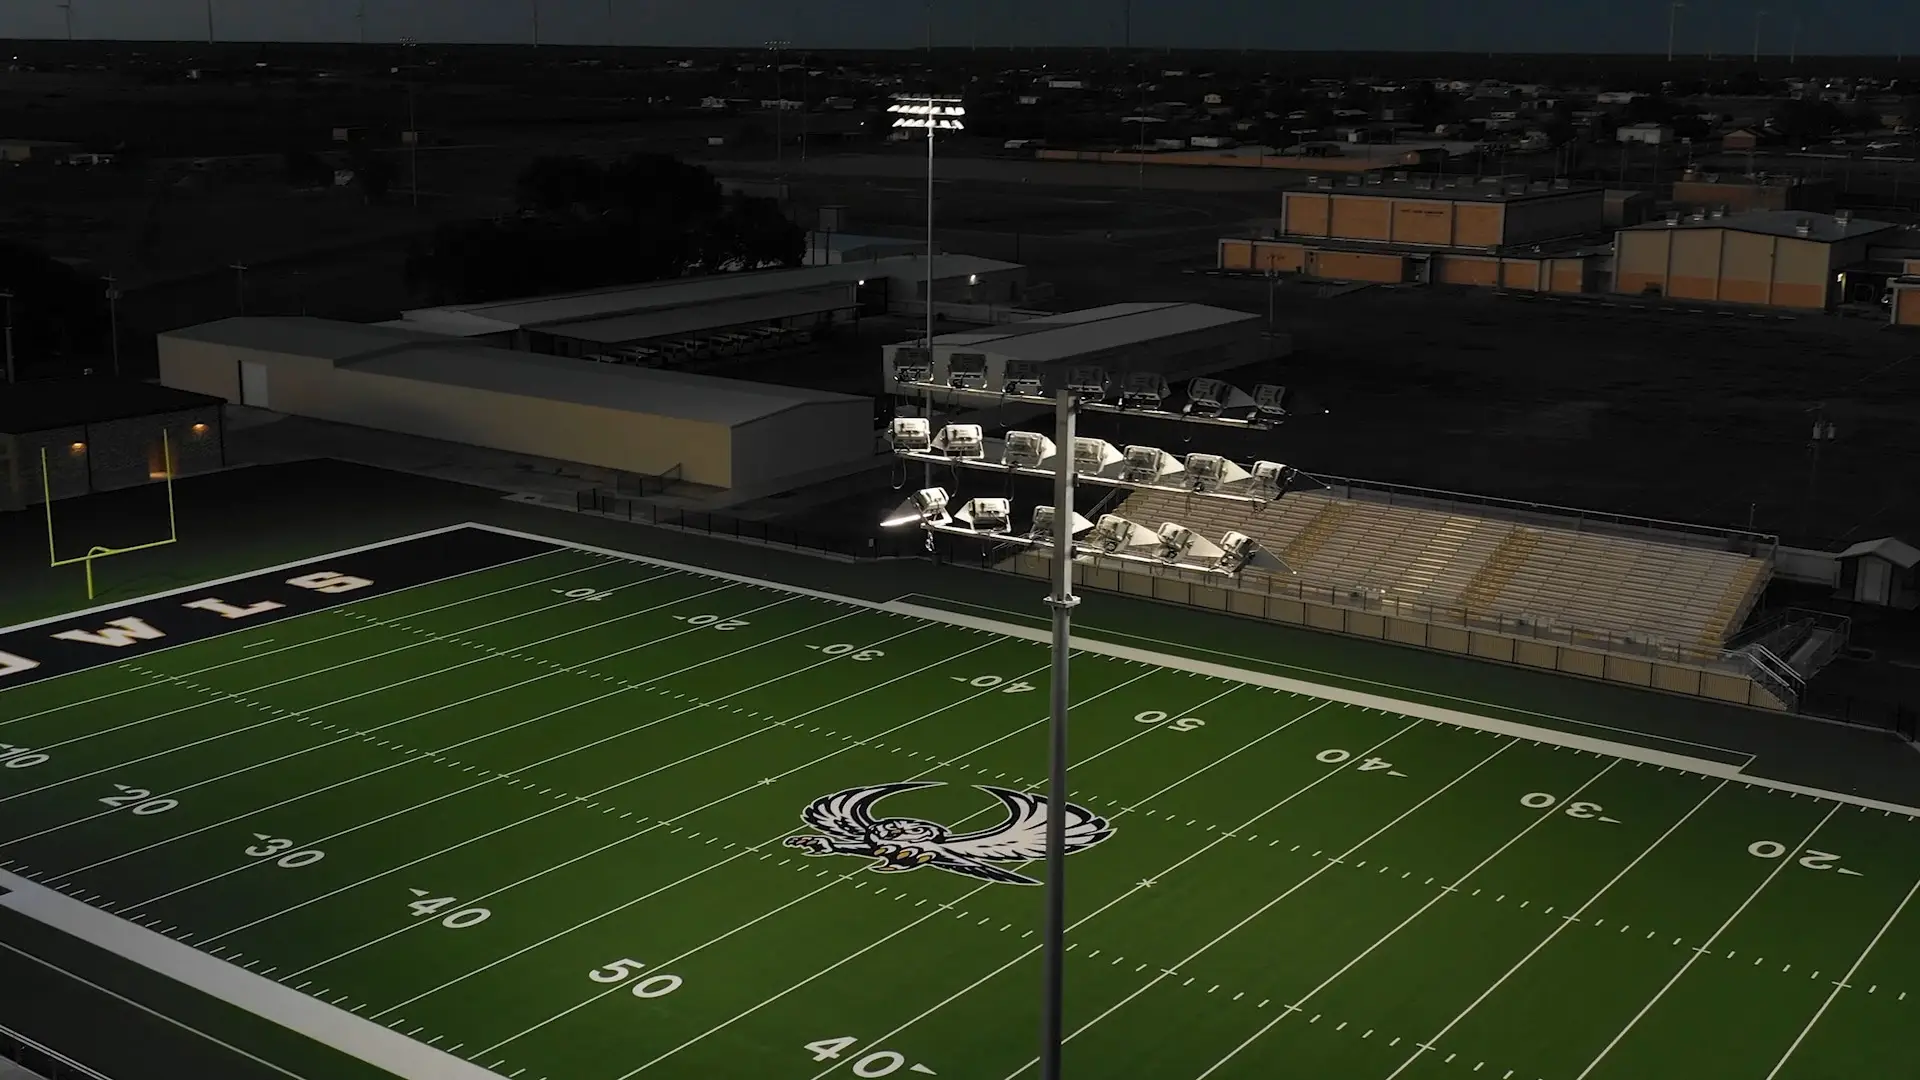 A light over a football field. Still frame from a business profile video.